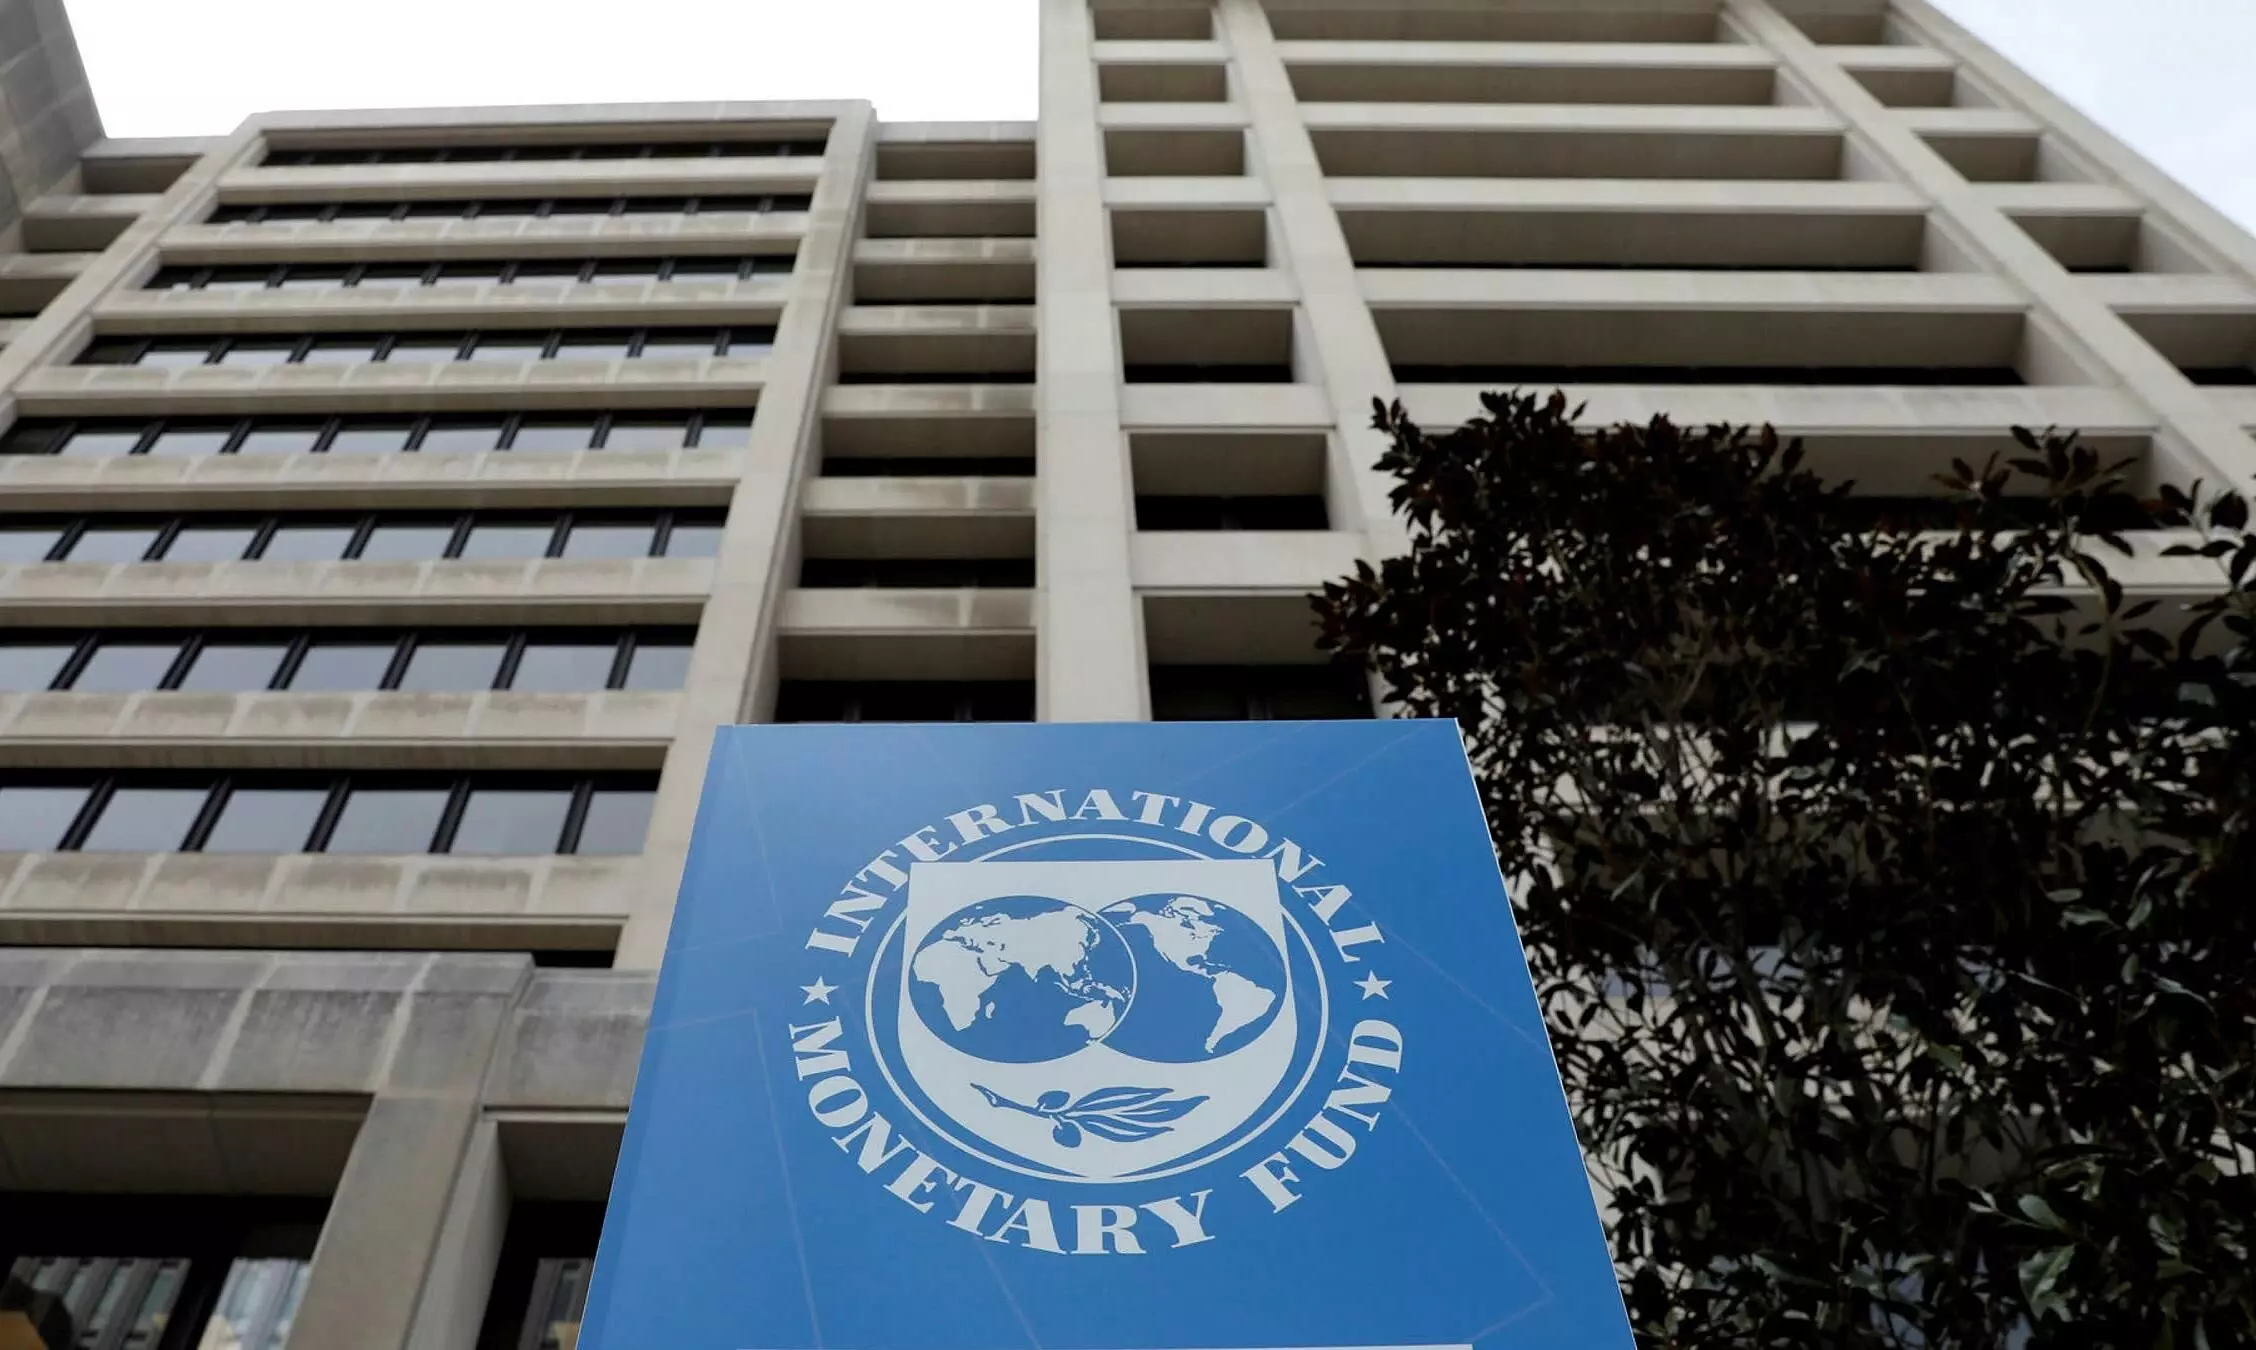 Ready to strengthen dialogue with India amidst pandemic: IMF